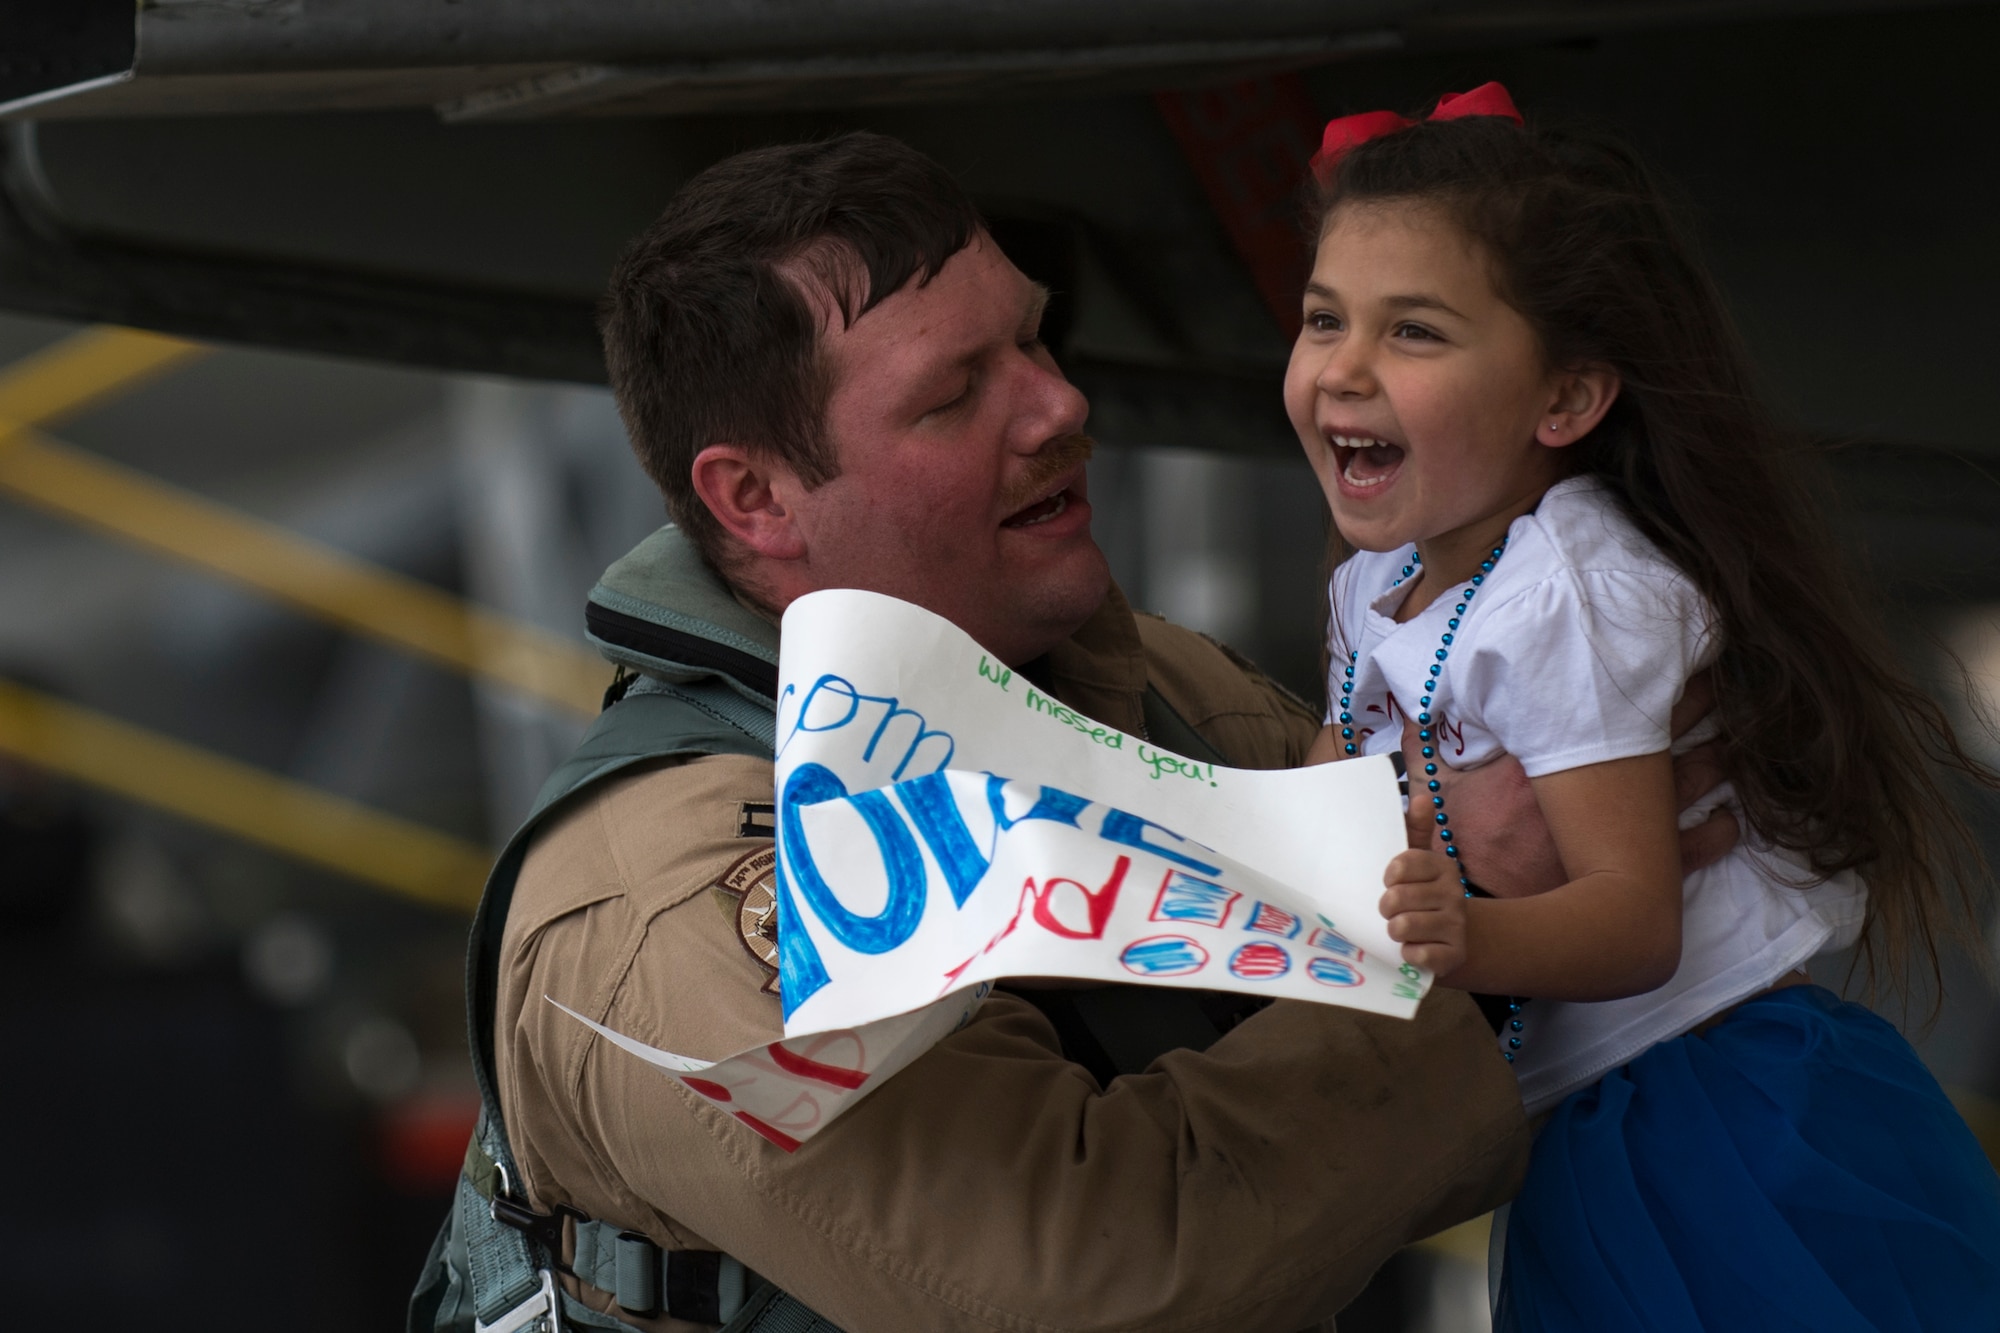 Capt. Brendan Lanphear, 74th Fighter Squadron pilot, lifts his daughter Rownin after returning from a deployment, Jan. 26, 2018, at Moody Air Force Base, Ga. During the seven-month deployment, the 74th FS flew more than 1,700 sorties, employed weapons more than 4,400 times, destroyed 2,300 targets and killed 2,800 ISIS insurgents. (U.S. Air Force photo by Senior Airman Daniel Snider)